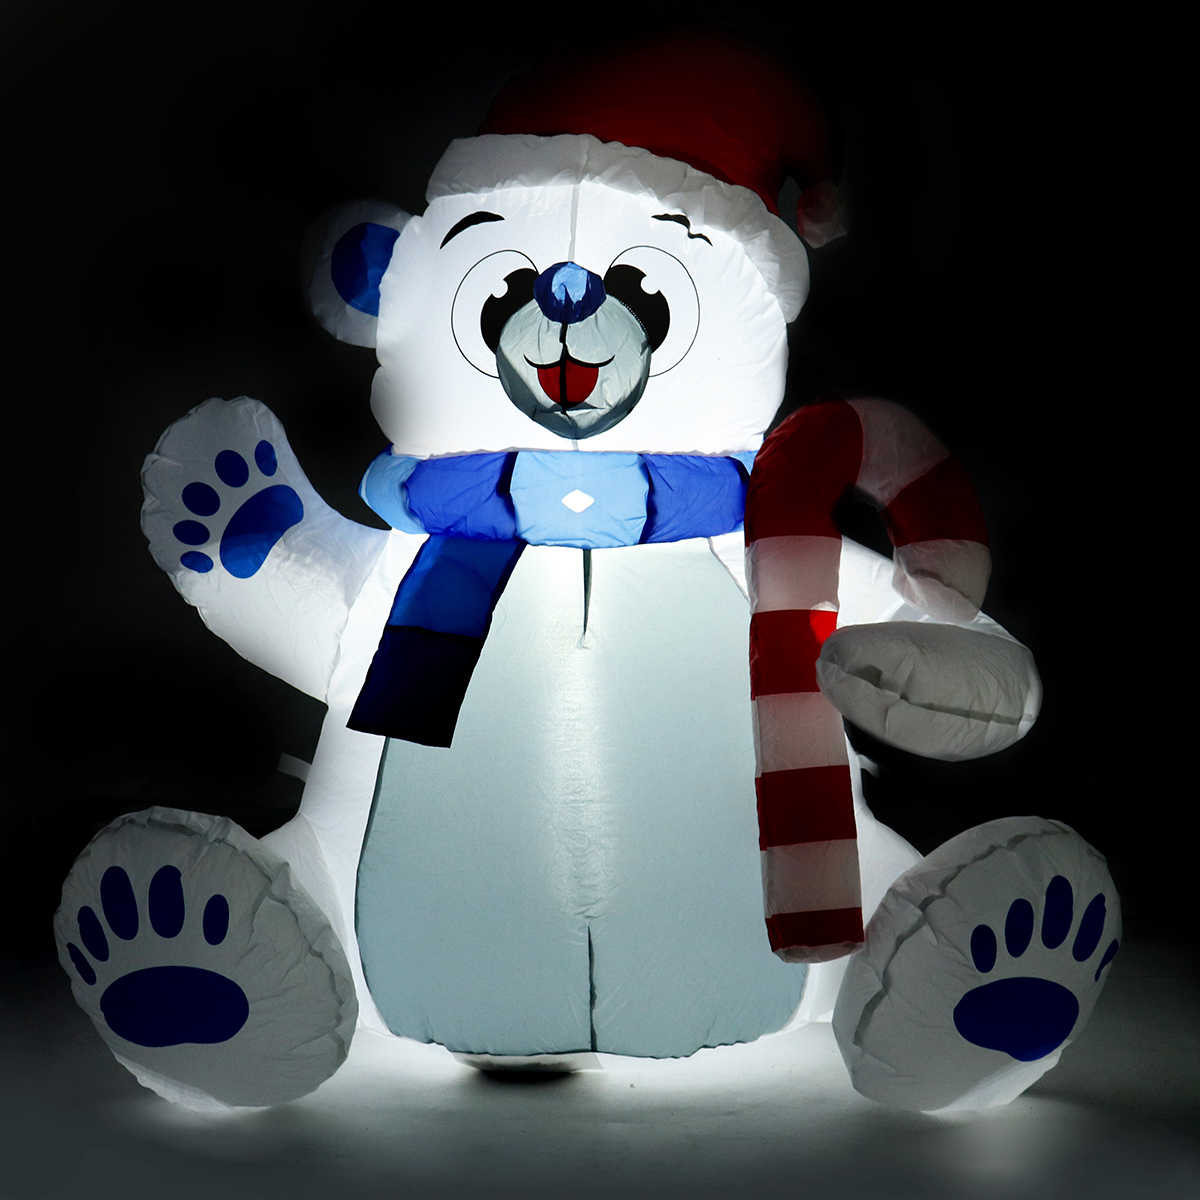 12M-LED-Christmas-Waterproof-Polyester-Built-In-Blower-UV-resistant-Inflatable-Bear-Toy-for-Christma-1829733-4